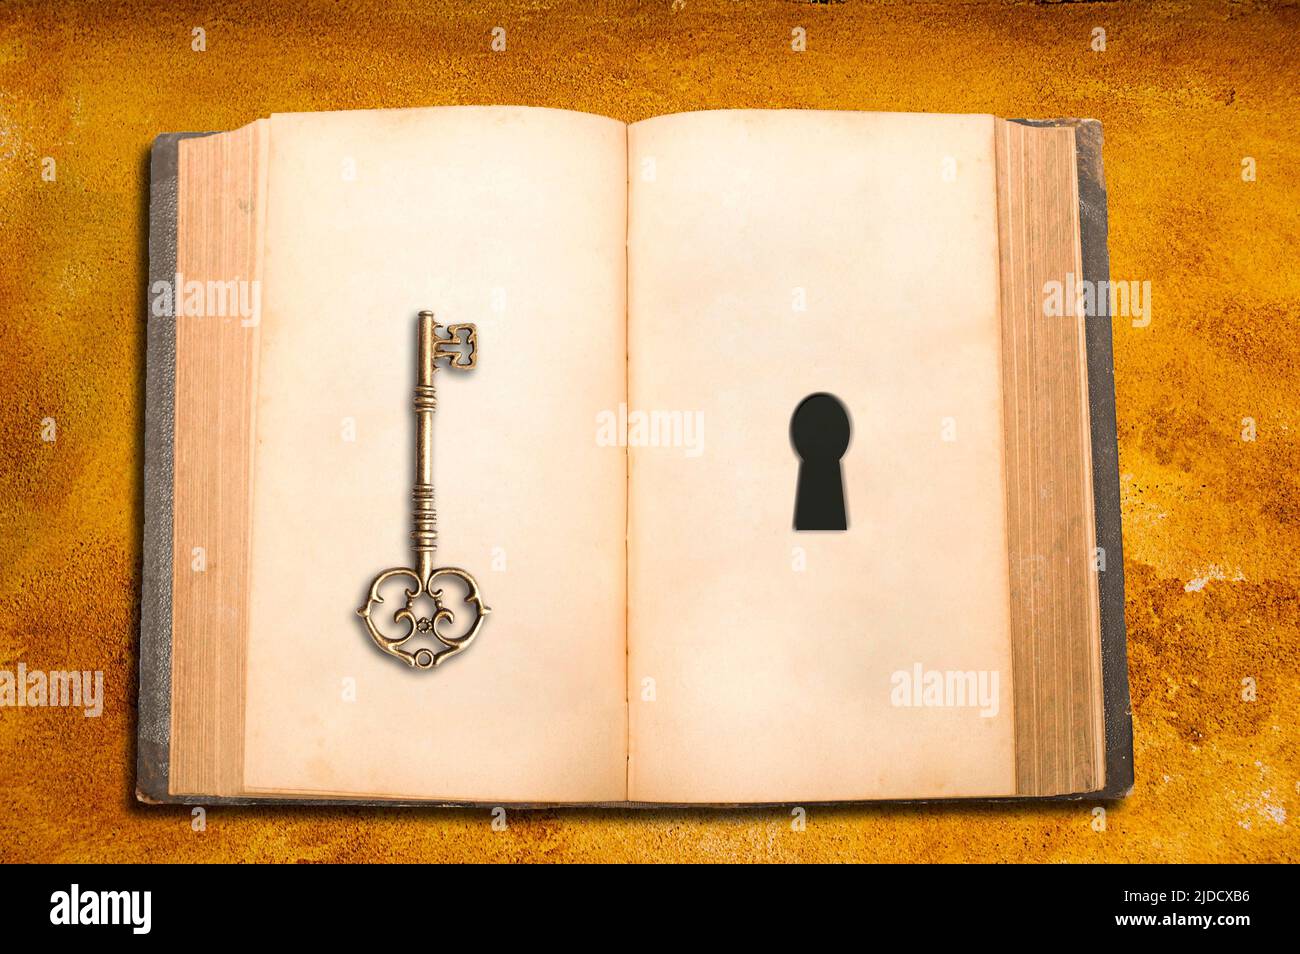 open book with blank pages and a key and a keyhole Stock Photo